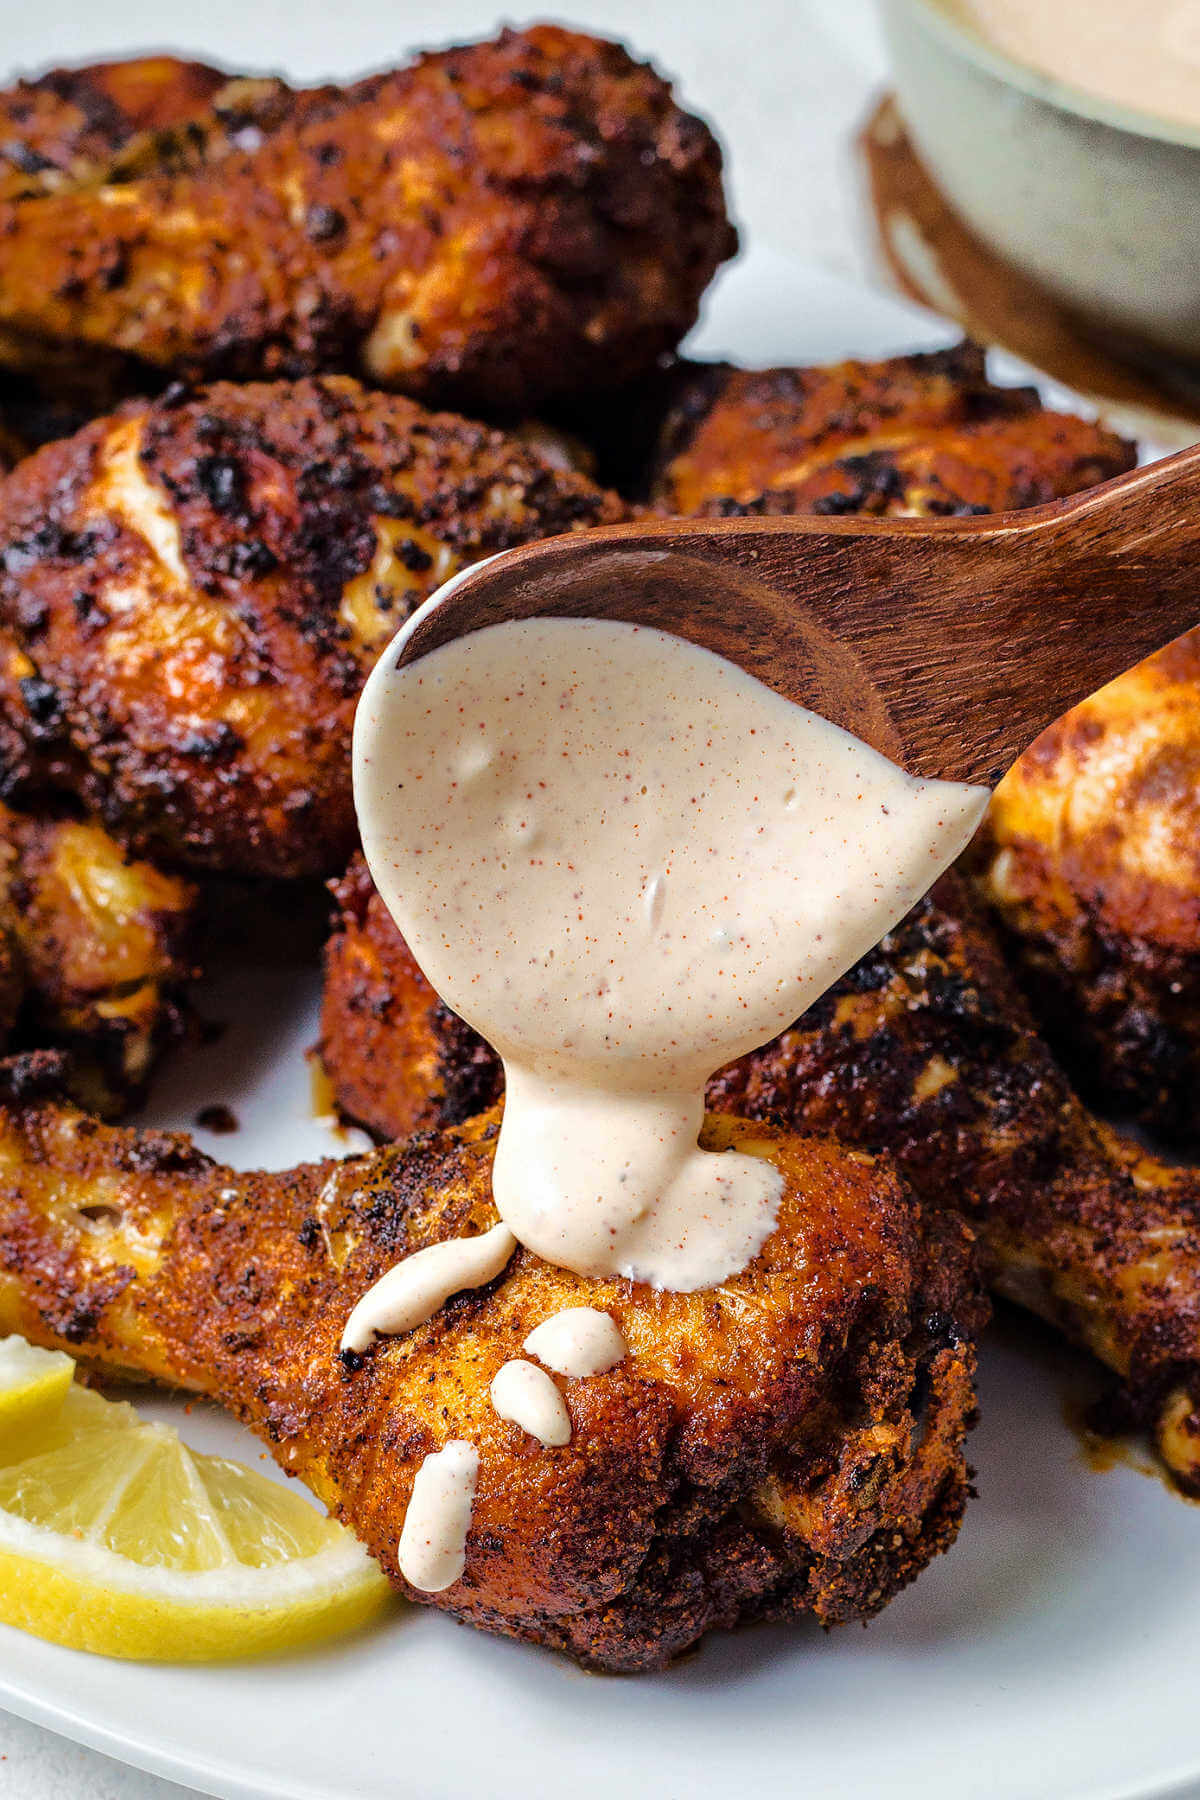 drizzling Alabama white sauce over fried chicken legs.